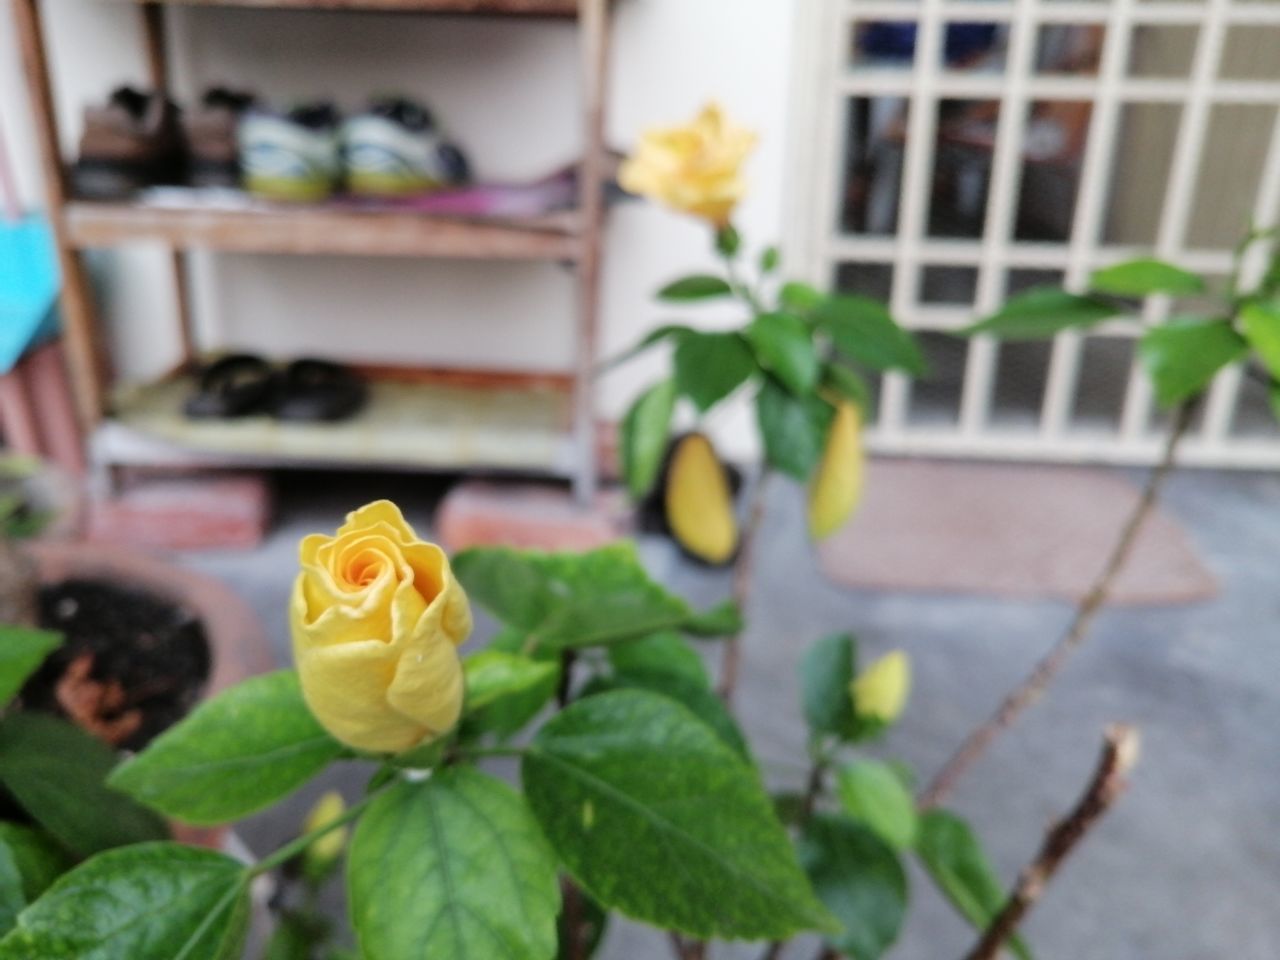 CLOSE-UP OF YELLOW ROSE FLOWER